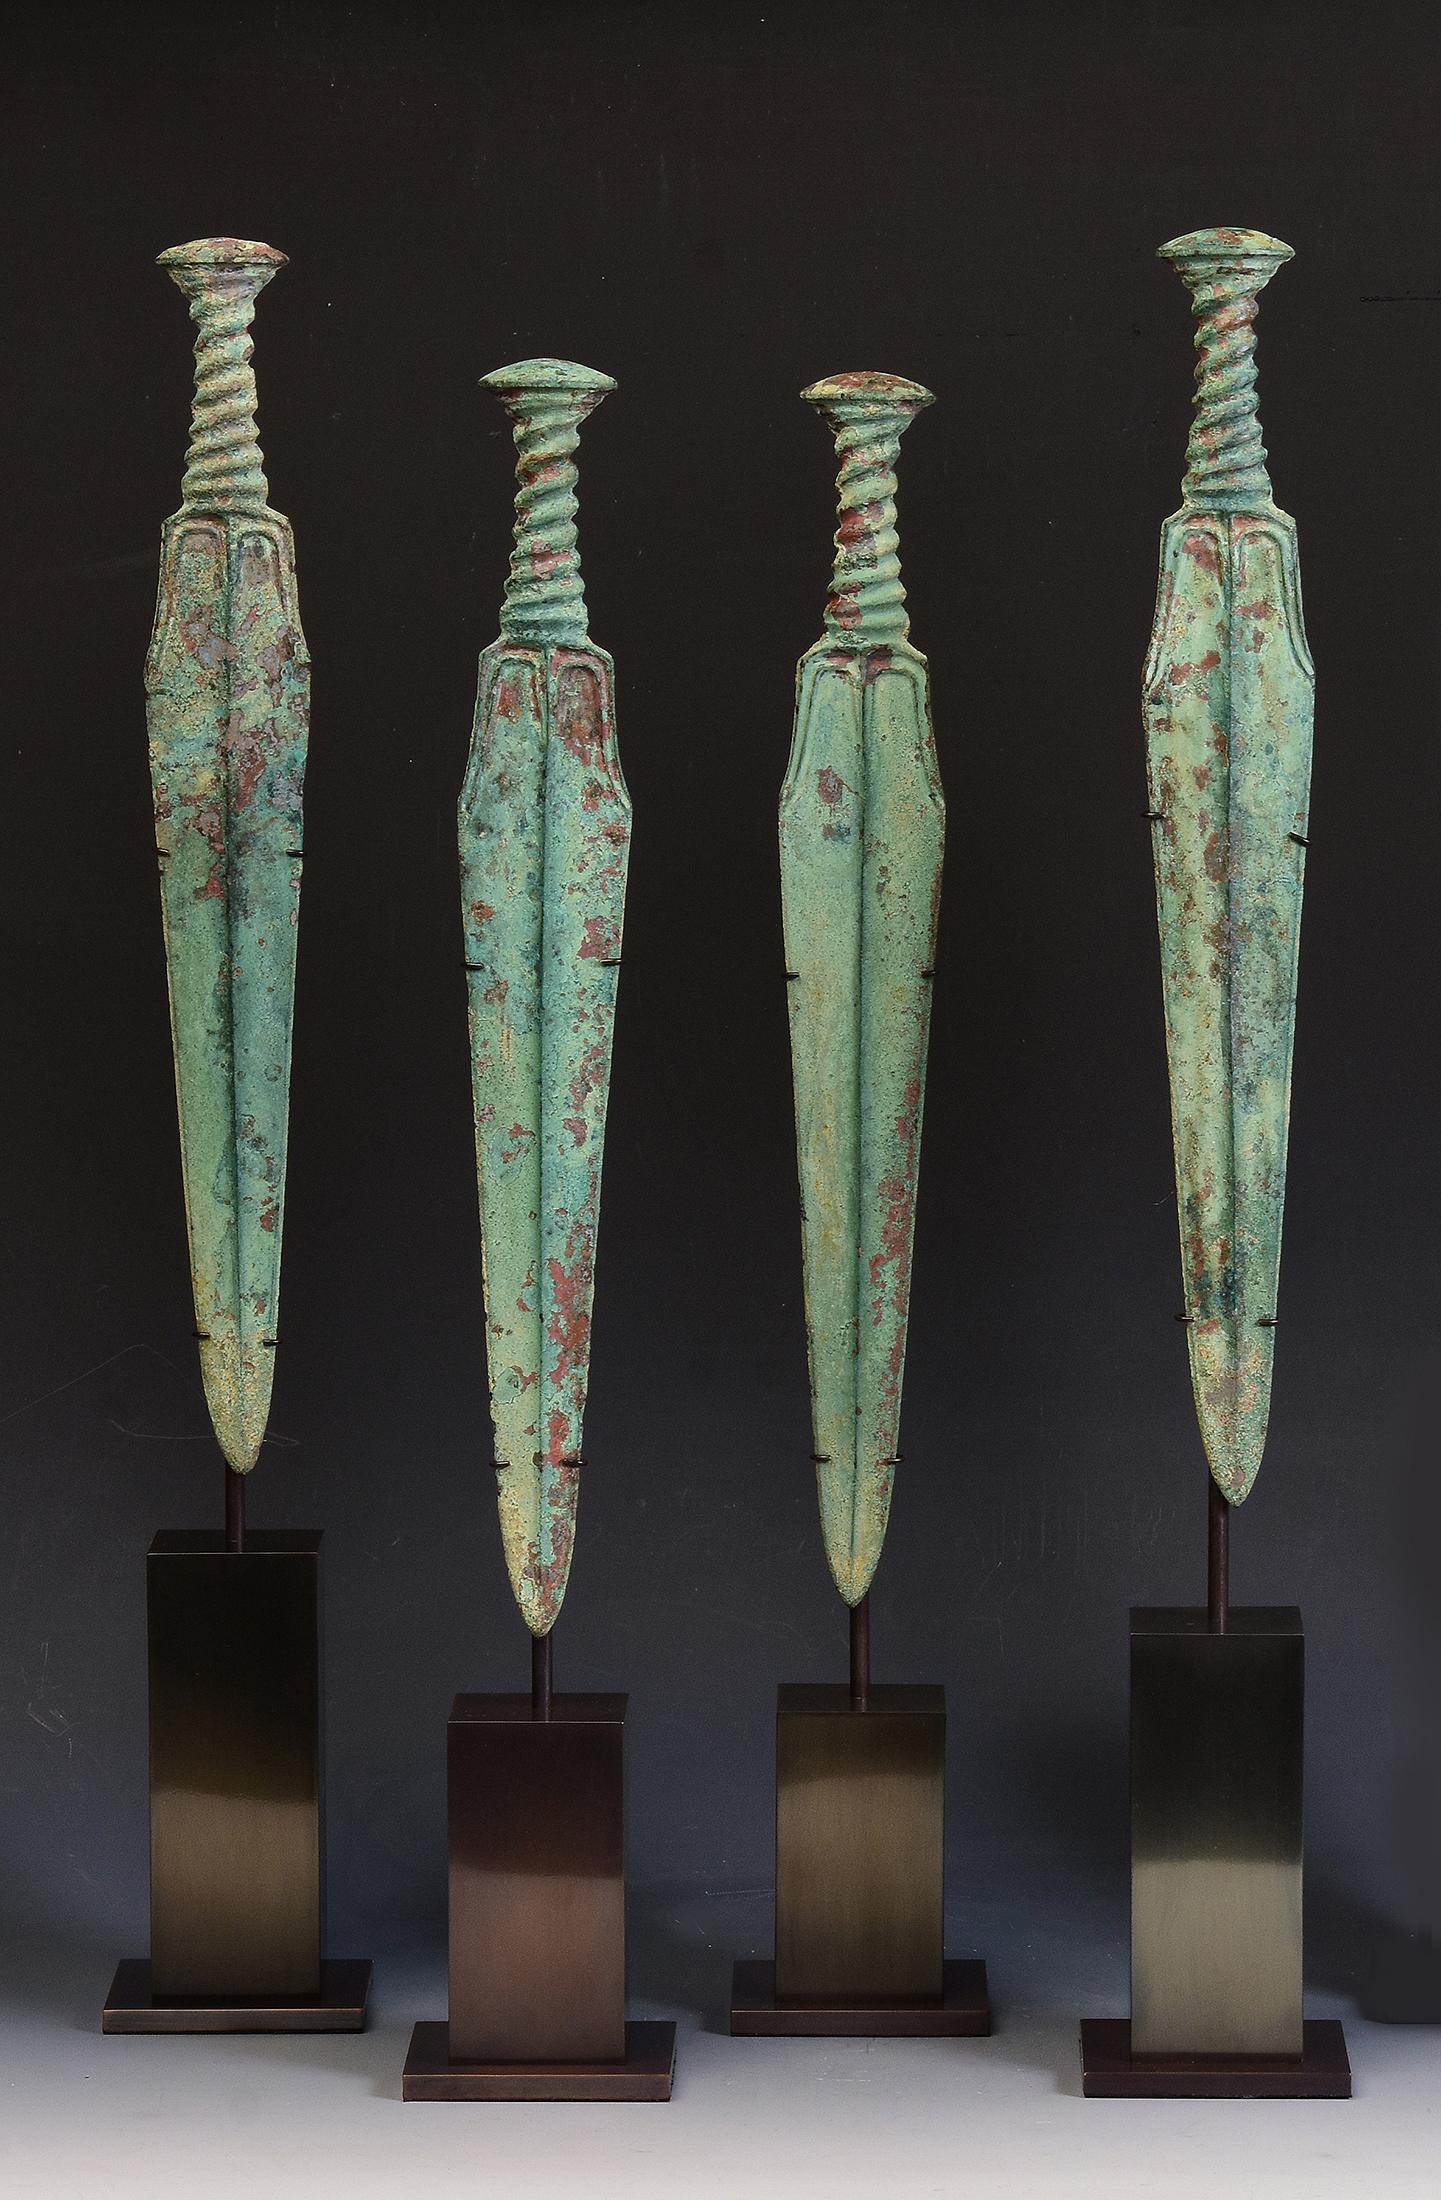 A set of ancient Luristan bronze swords with excellent green patina.

Luristan bronze comes from the province of Lorestan, a region of nowadays Western Iran in the Zagros Mountains. With its rich and long history, Luristan culture is well-known